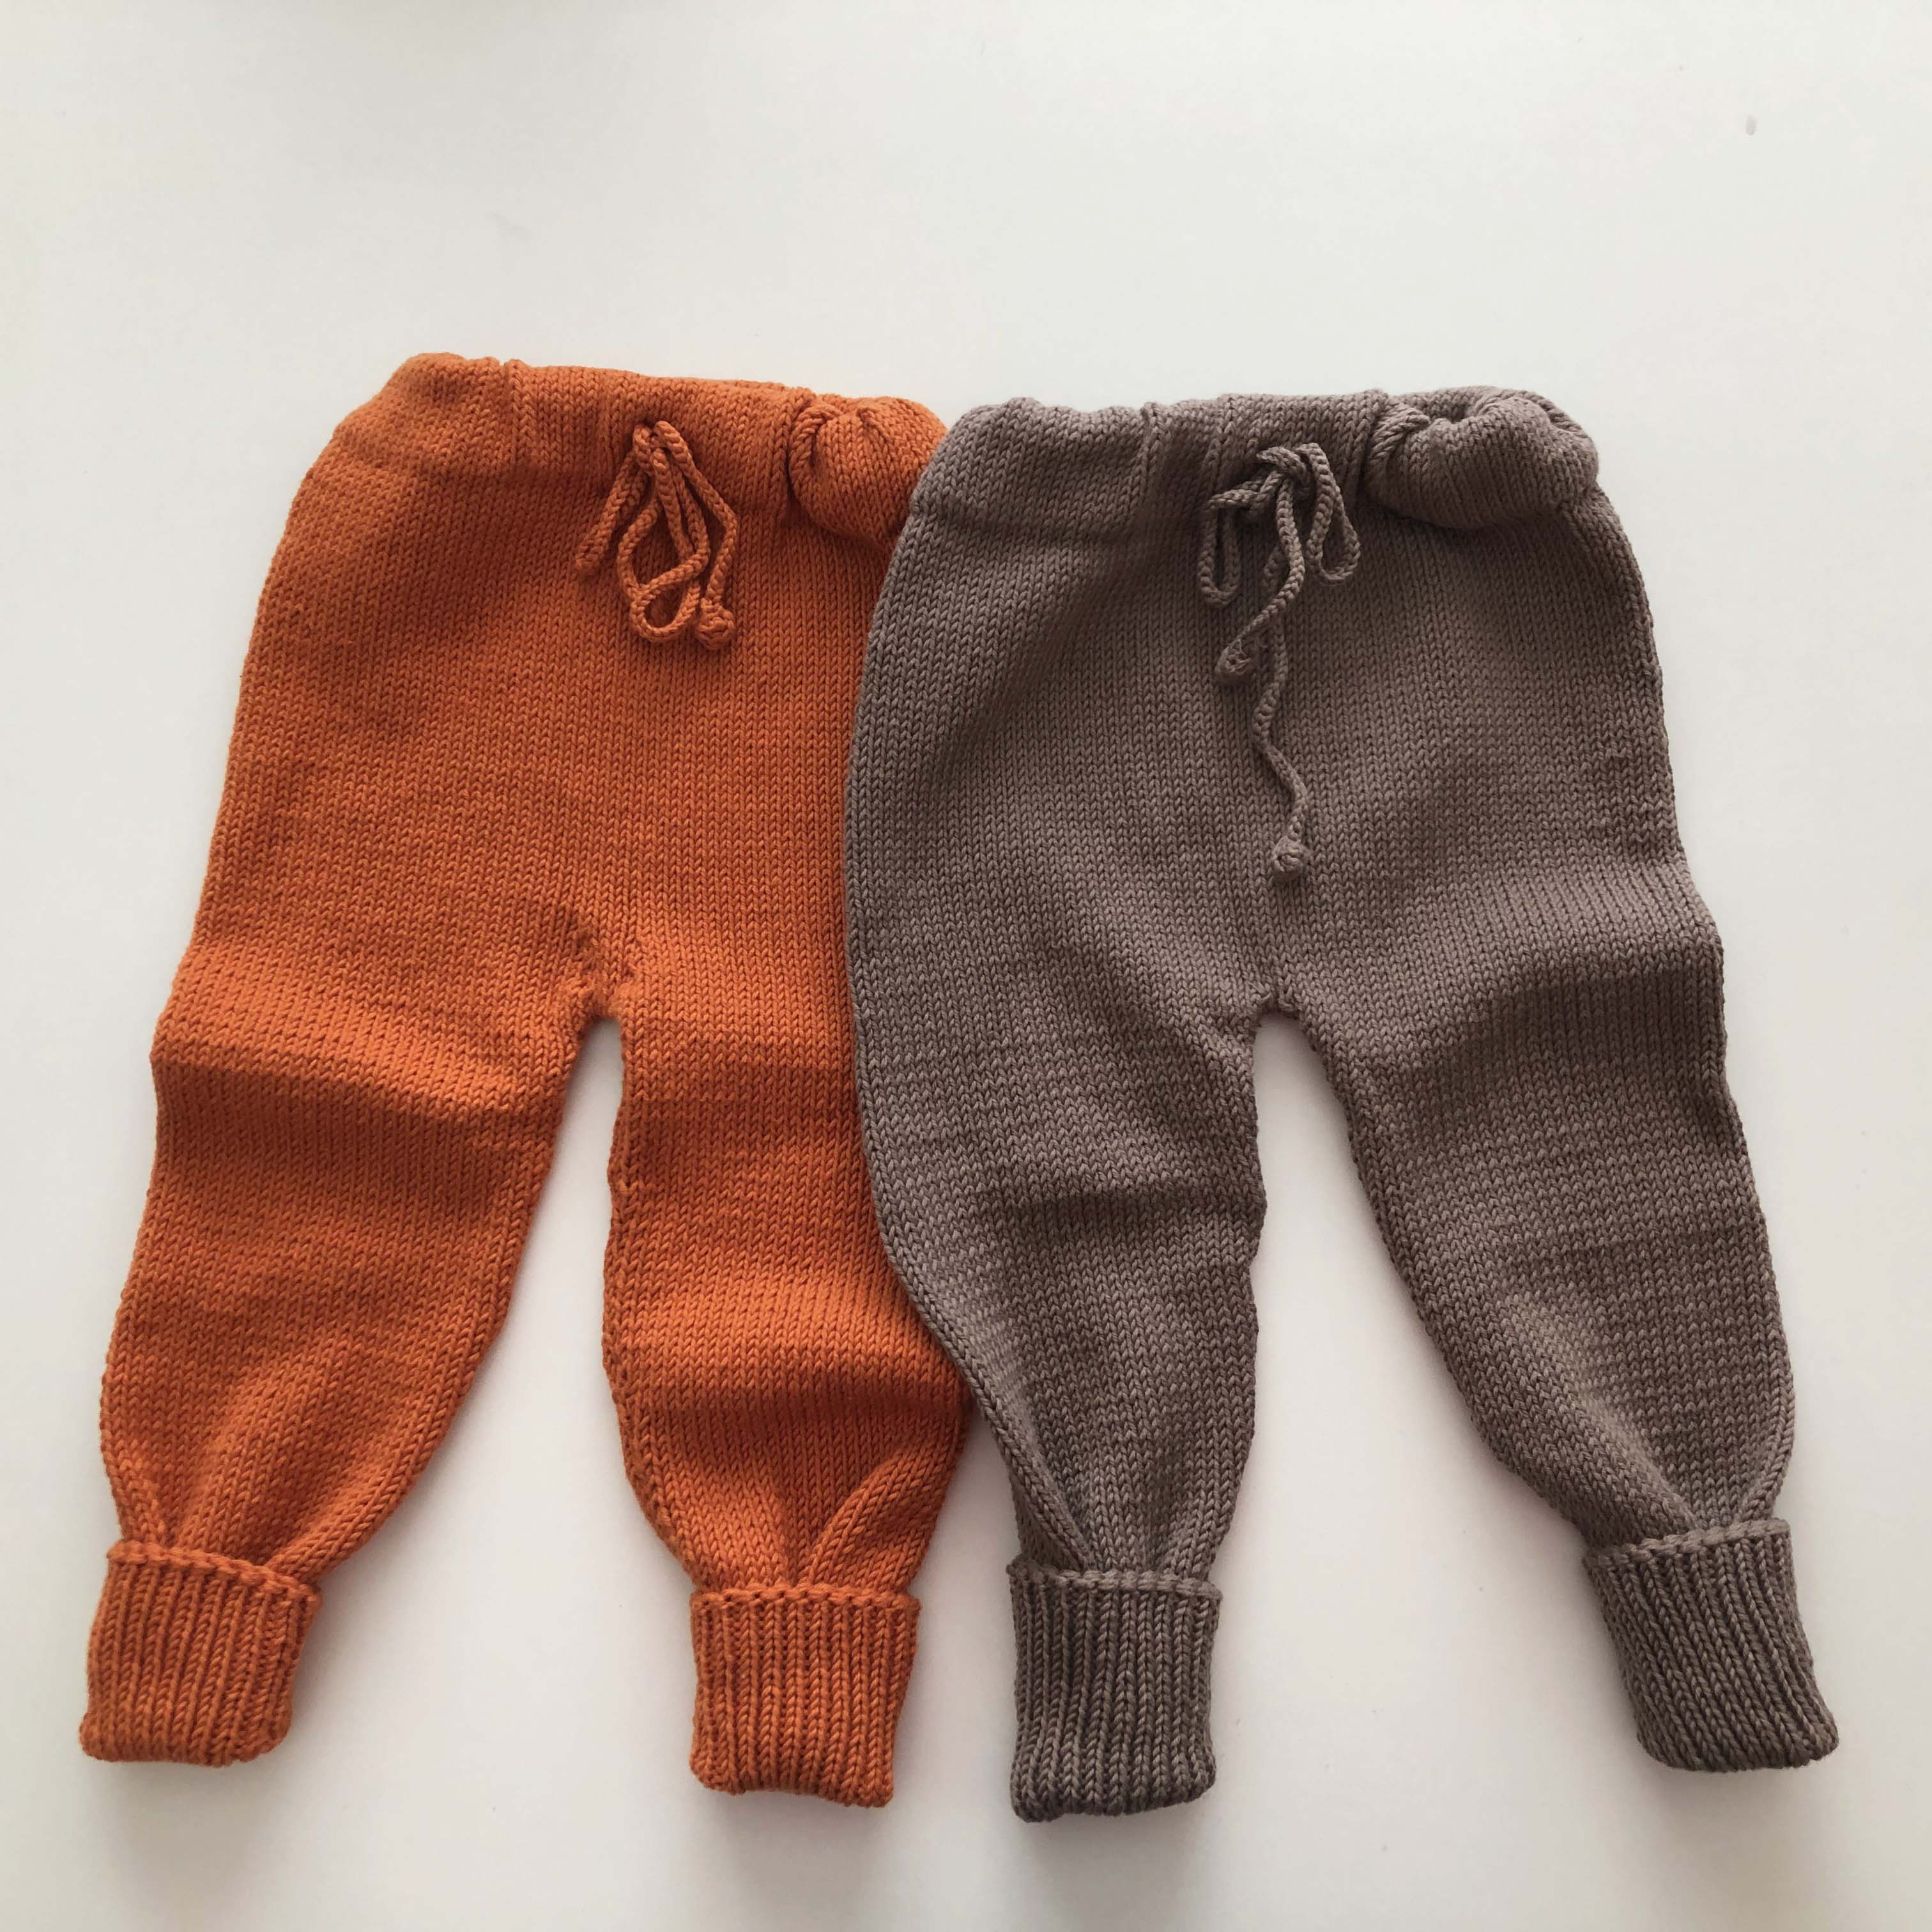 Knitted Pants - choose colors